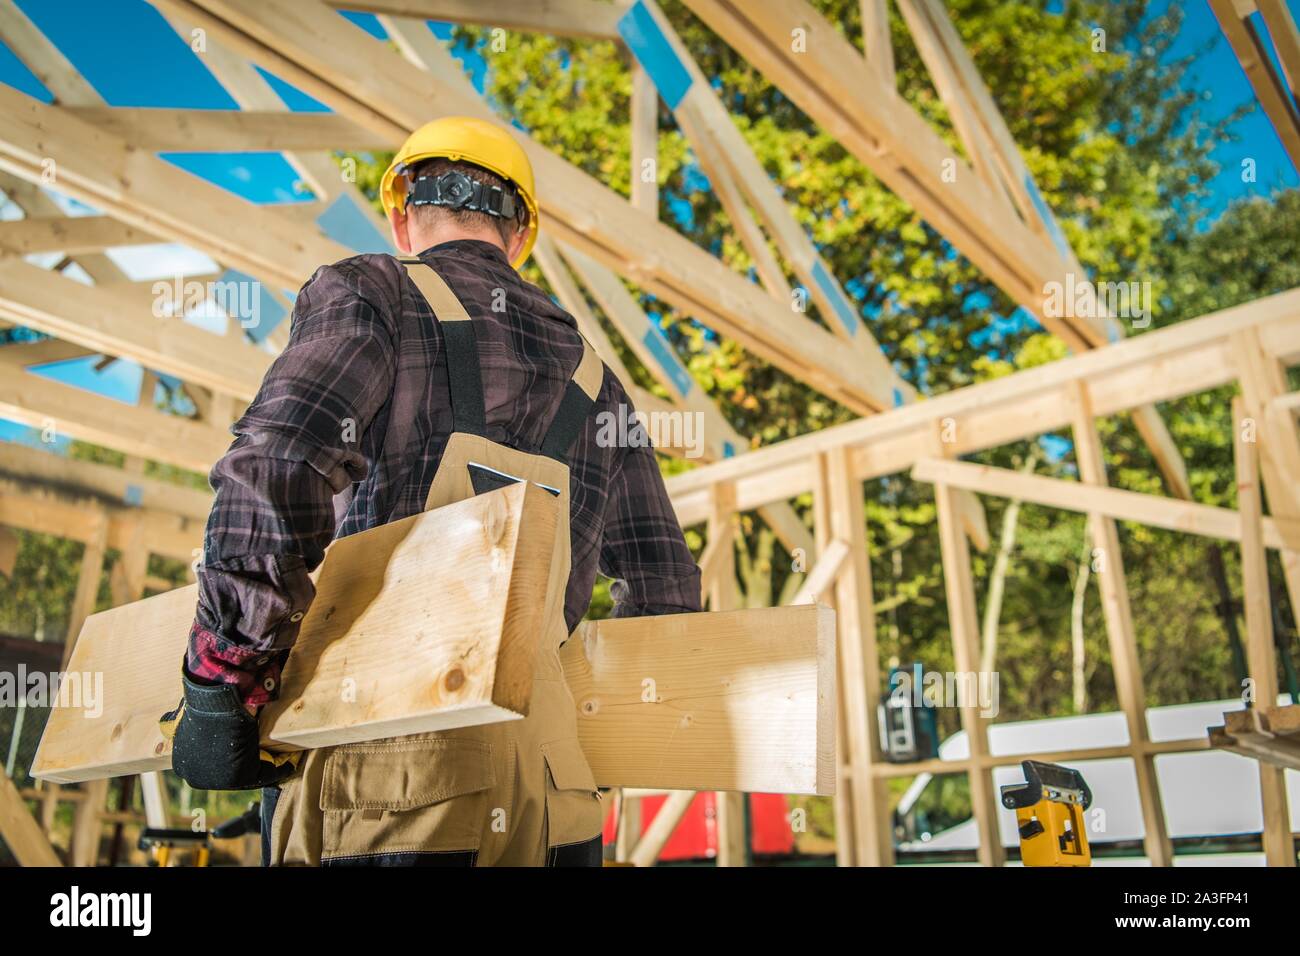 Caucasian Construction Worker Moving Wood Elements. Wooden Building Frame in the Background. Industrial Theme. Stock Photo